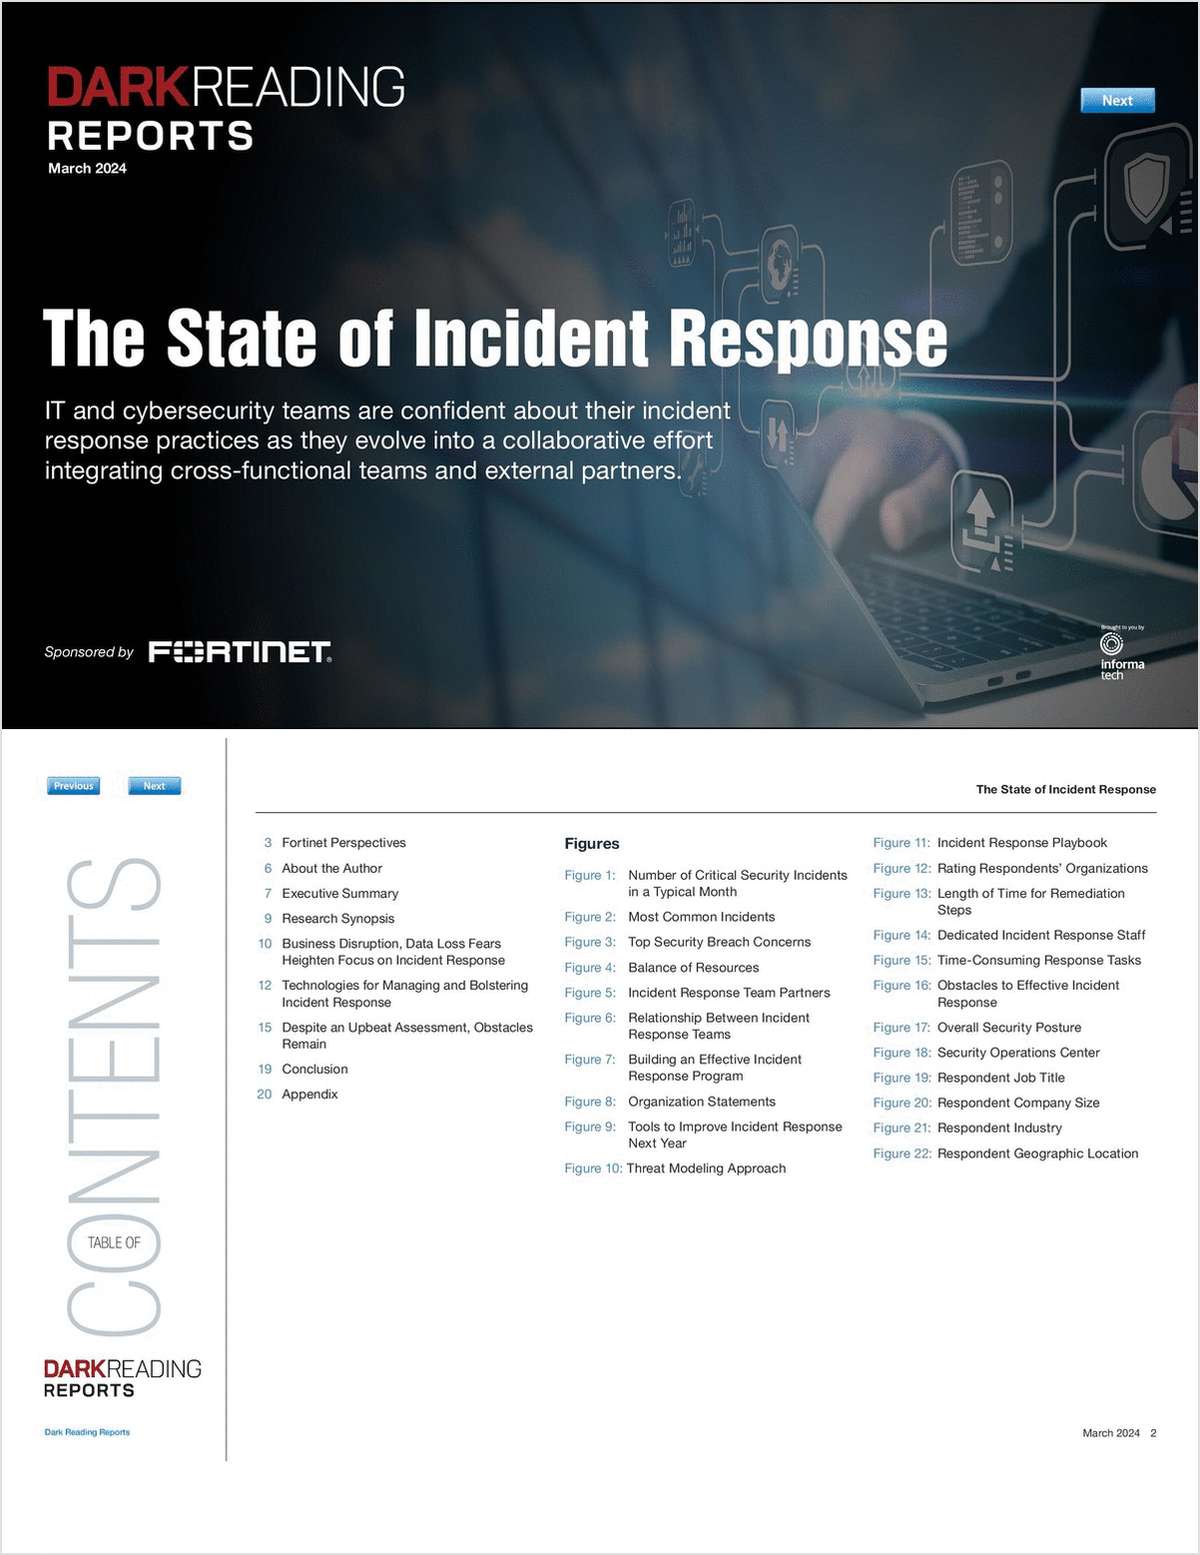 The State of Incident Response